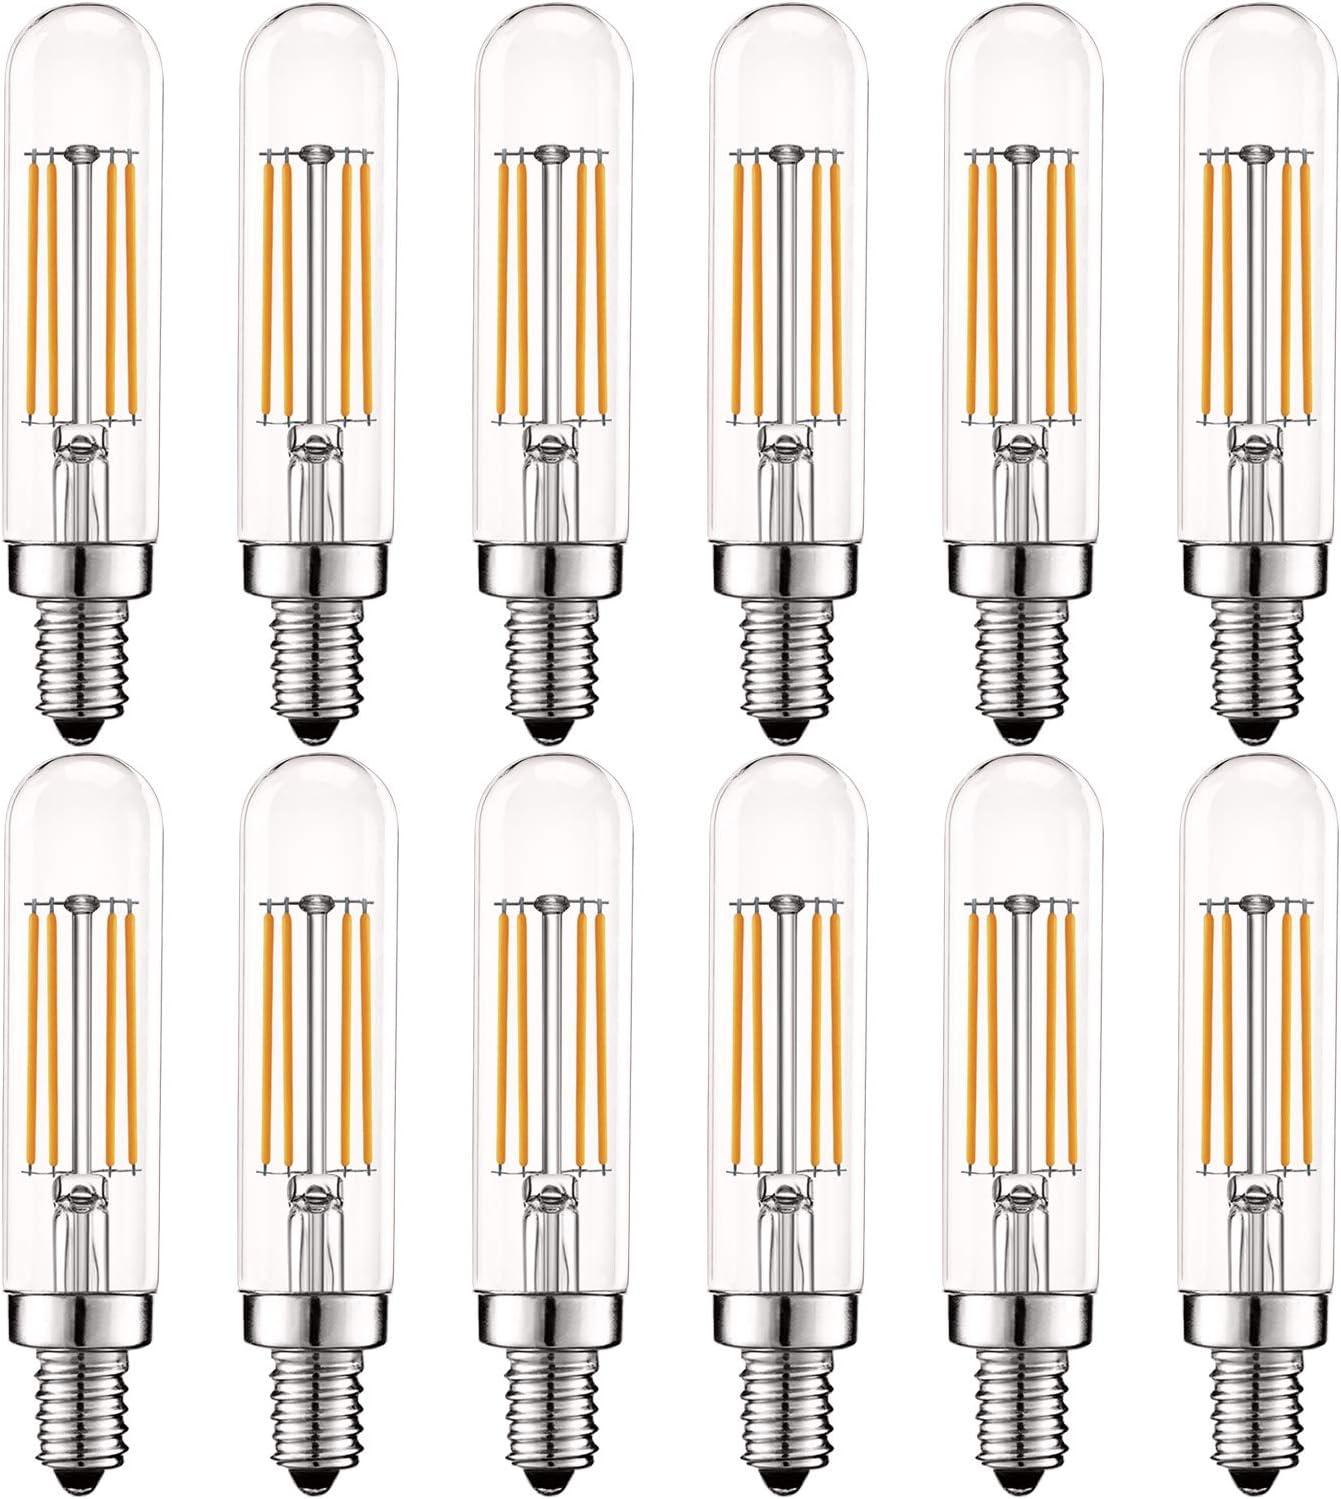 Vintage E12 5W Dimmable LED Tube Bulb in Warm White